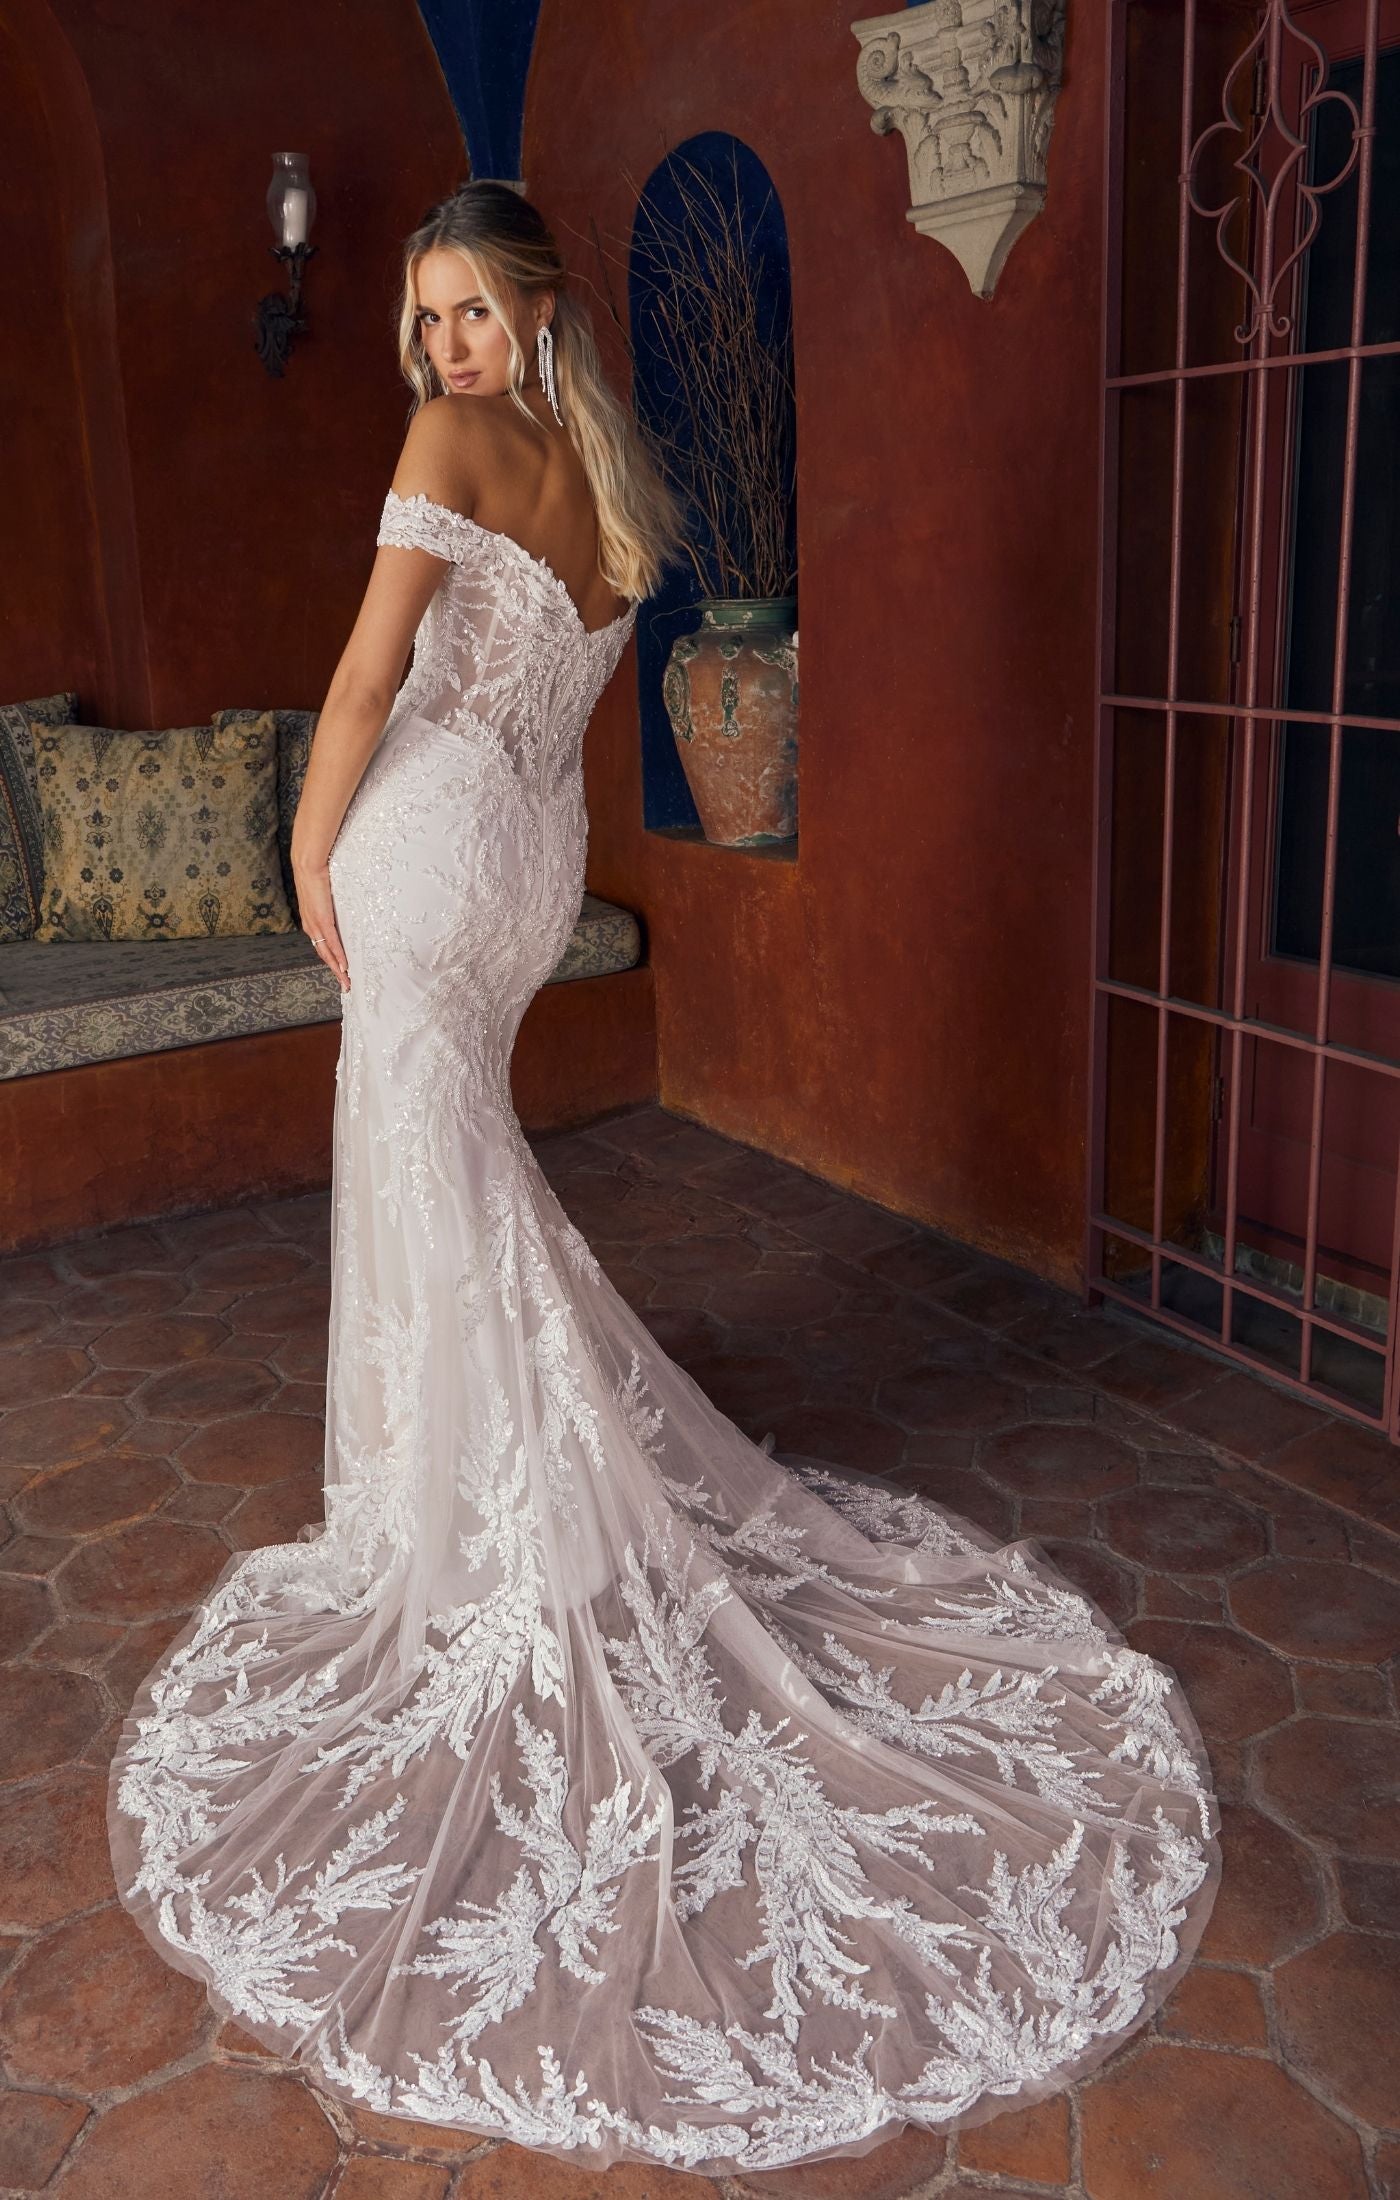 Casablanca Bridal 2554 Fit And Flare Off The Shoulder Plunging Neckline Sequin Floral Lace Train Wedding Gown. Get ready to turn heads with our sensational fit and flare wedding dress, Style 2554 Rochelle. This exquisite gown is designed to celebrate your curves and make you feel like a true goddess on your special day, radiating confidence and timeless beauty